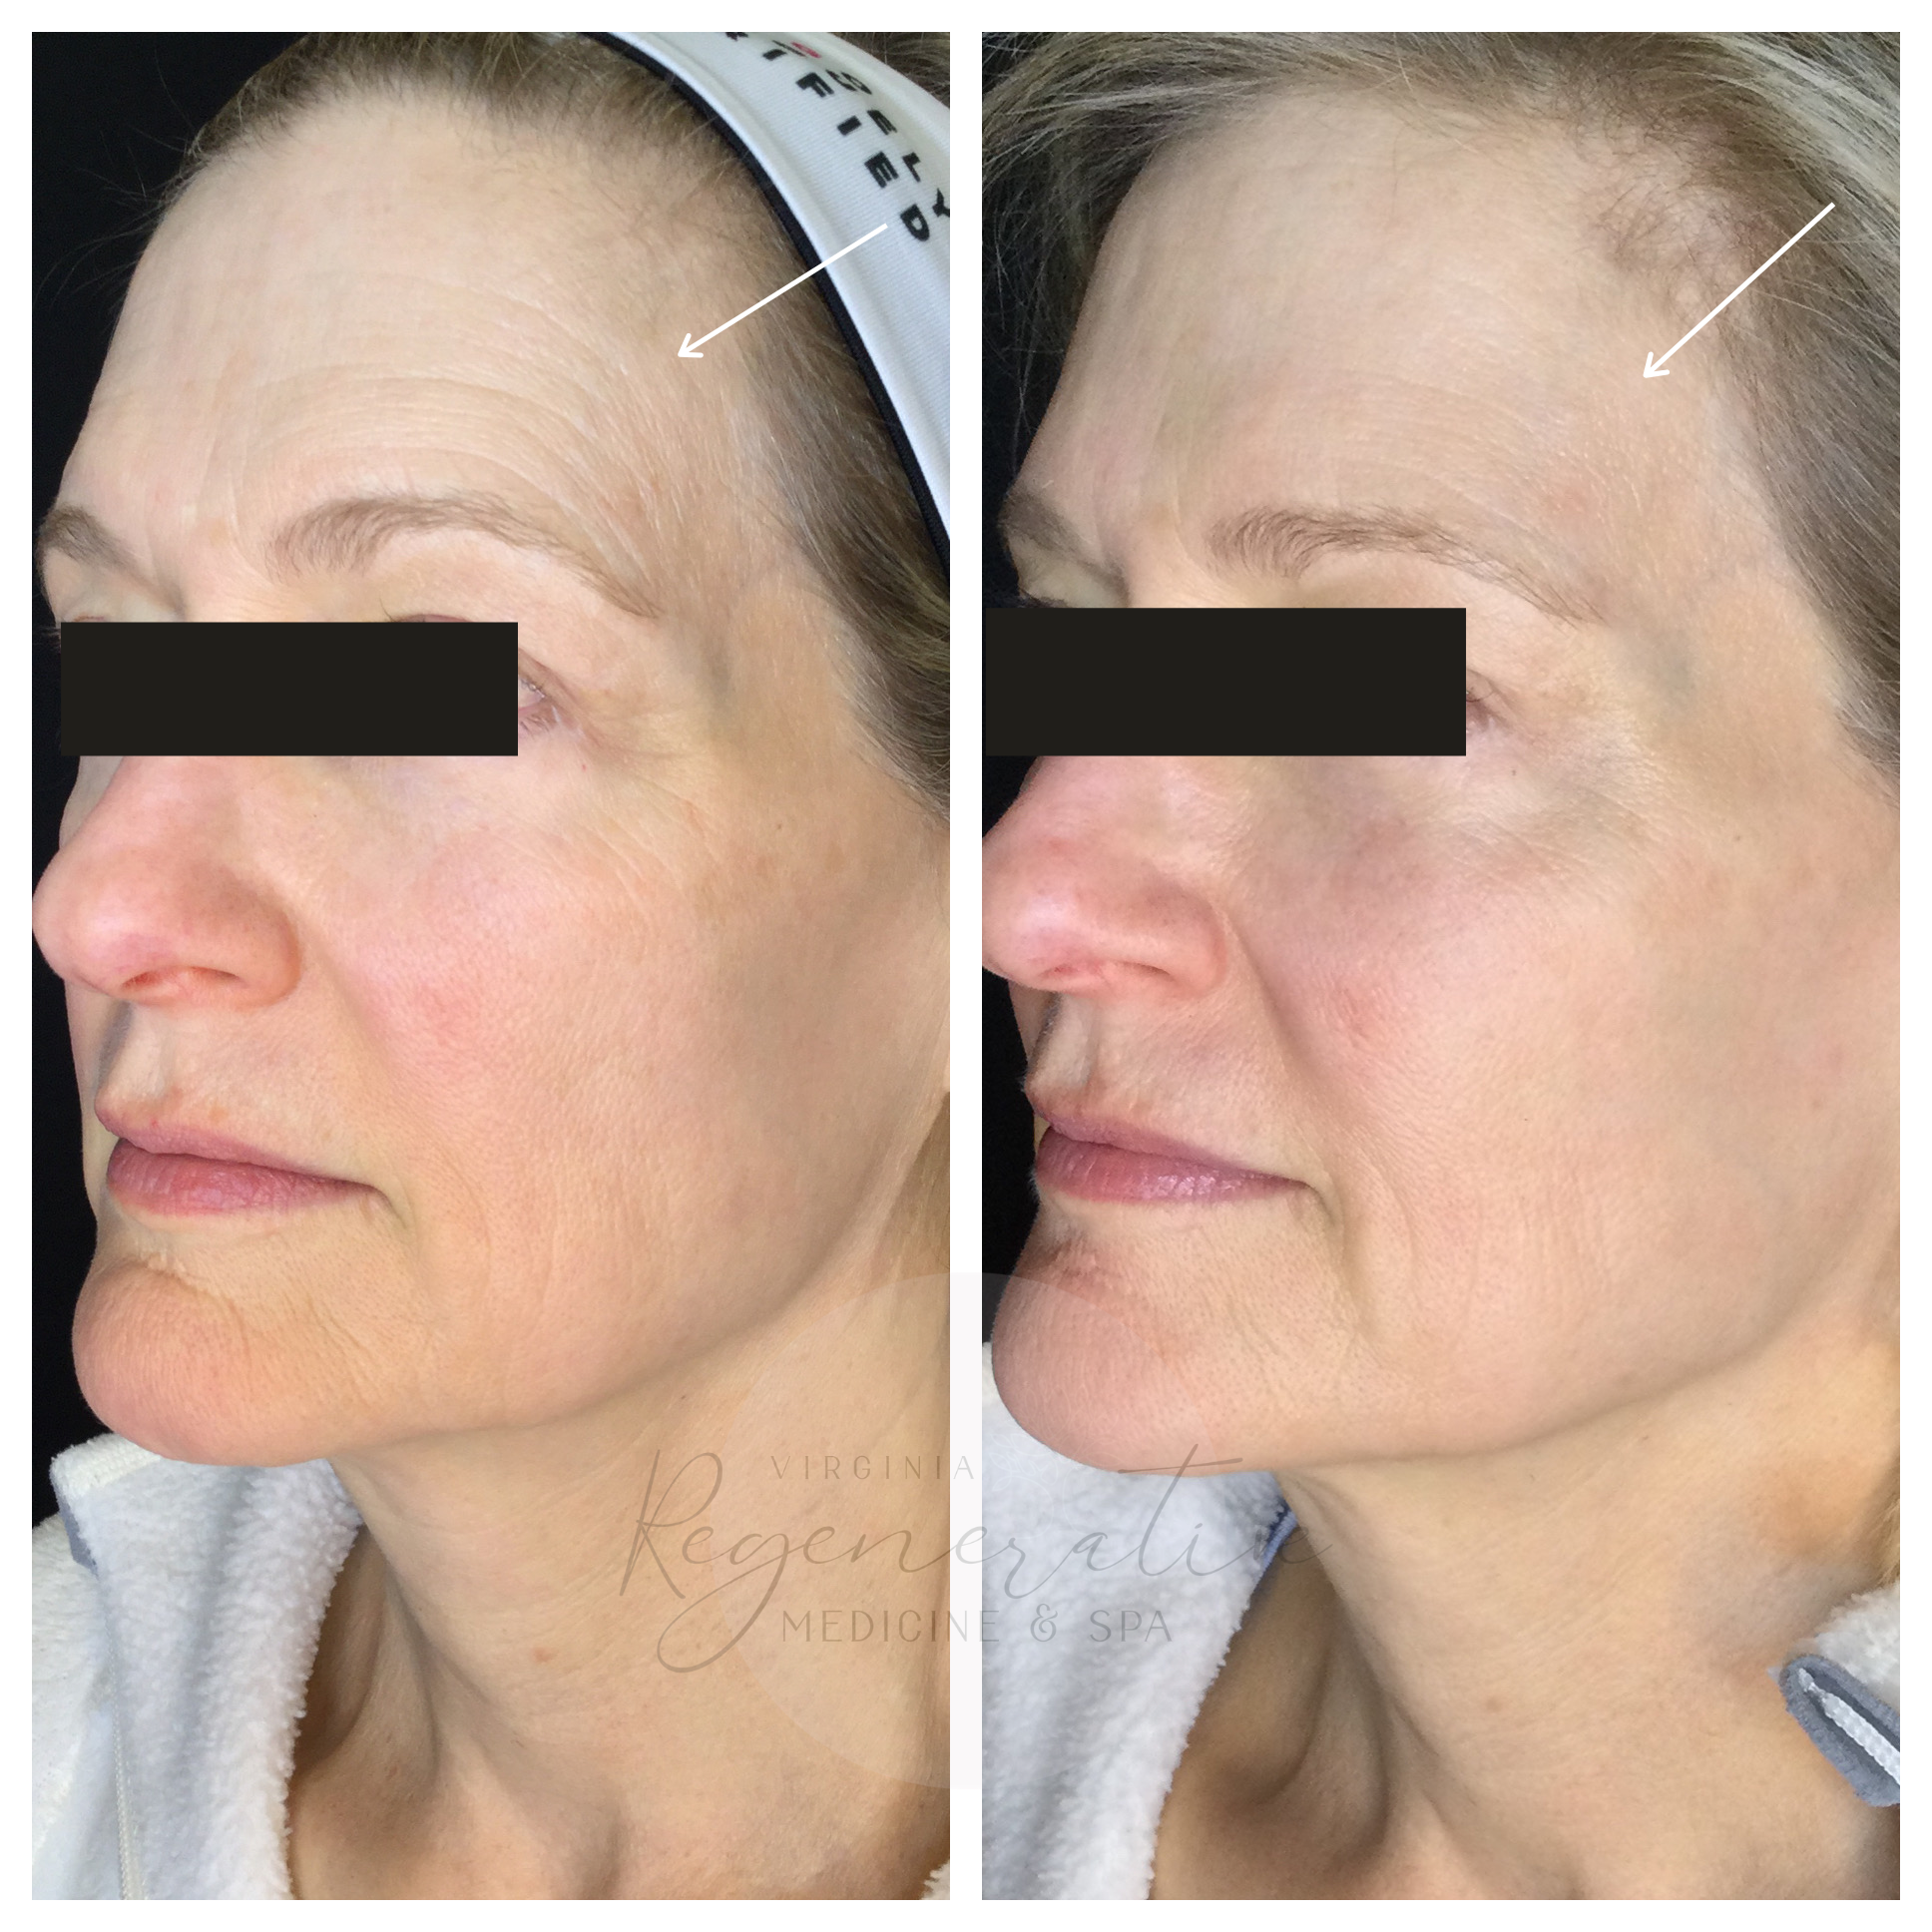 Microneedling with Exosomes Before and After 2 Weeks Apart